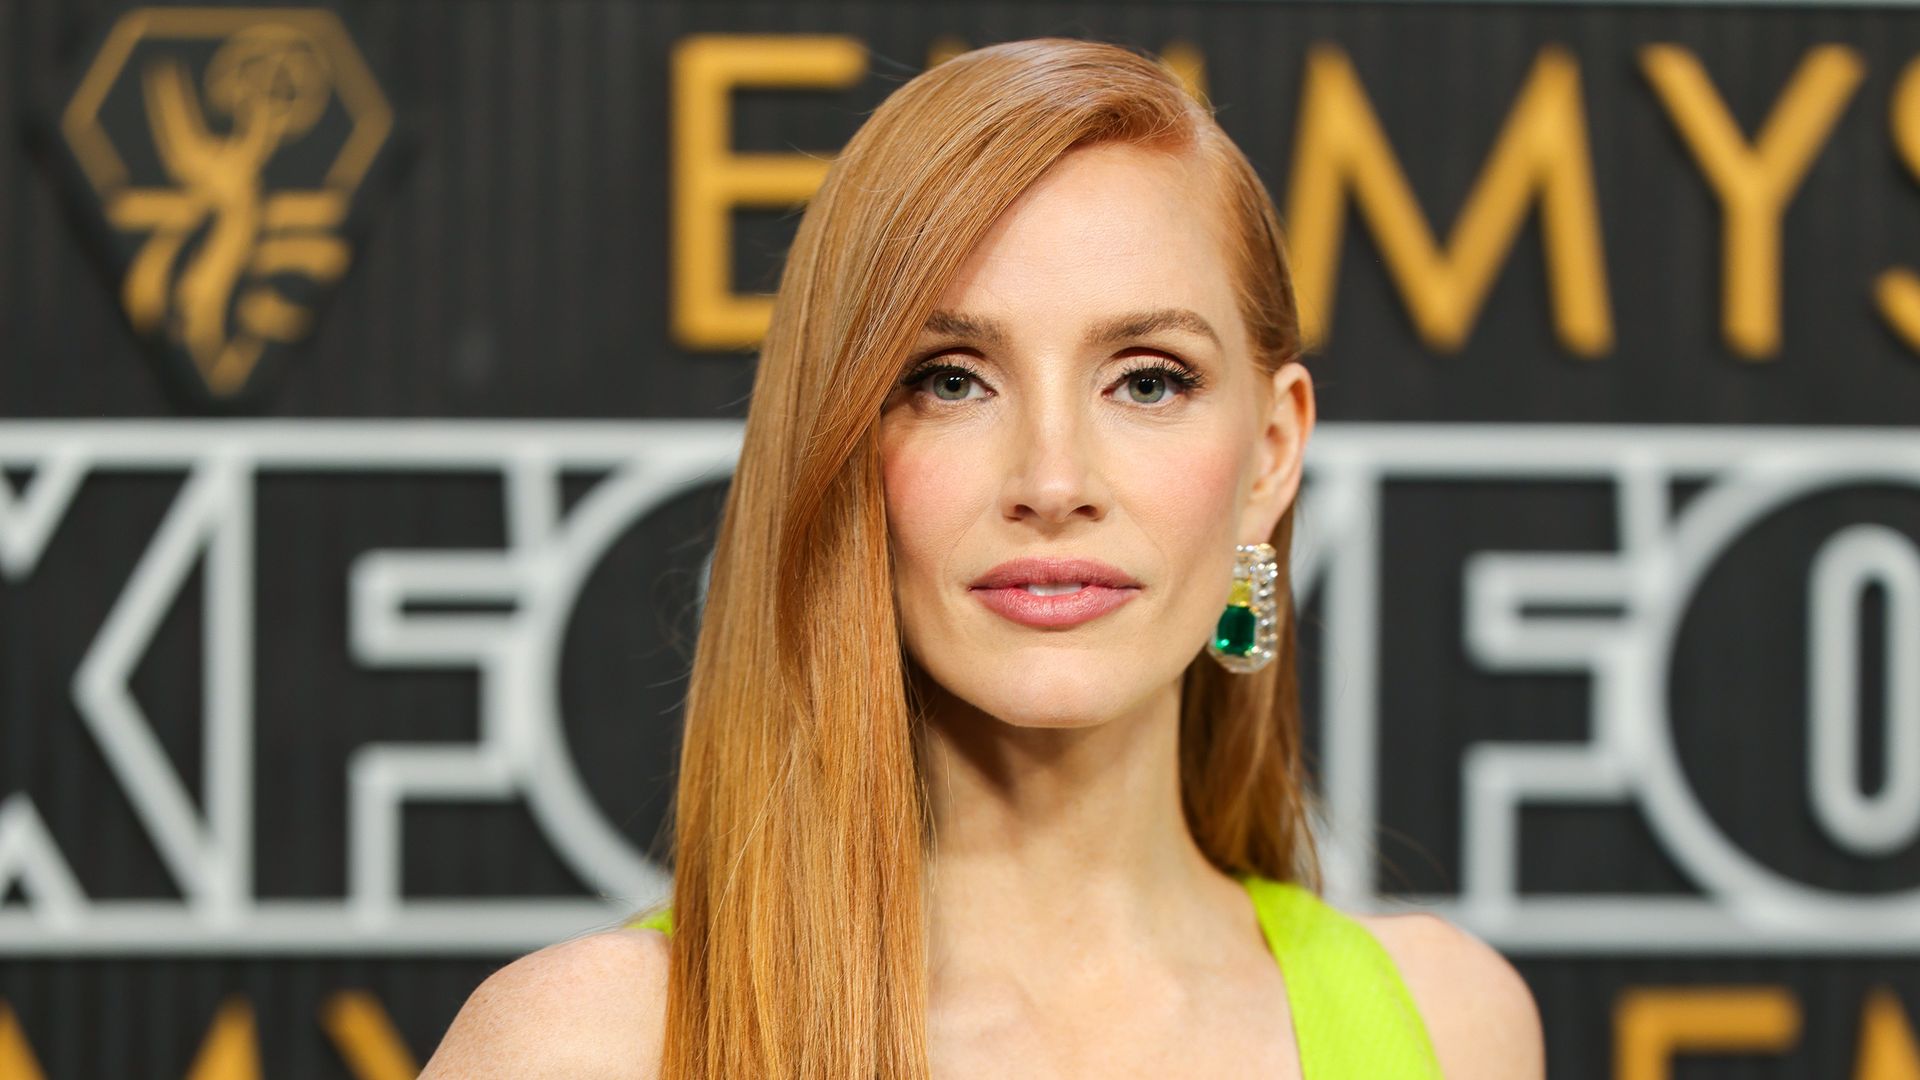 Jessica Chastain with flawless skin at the Emmys 